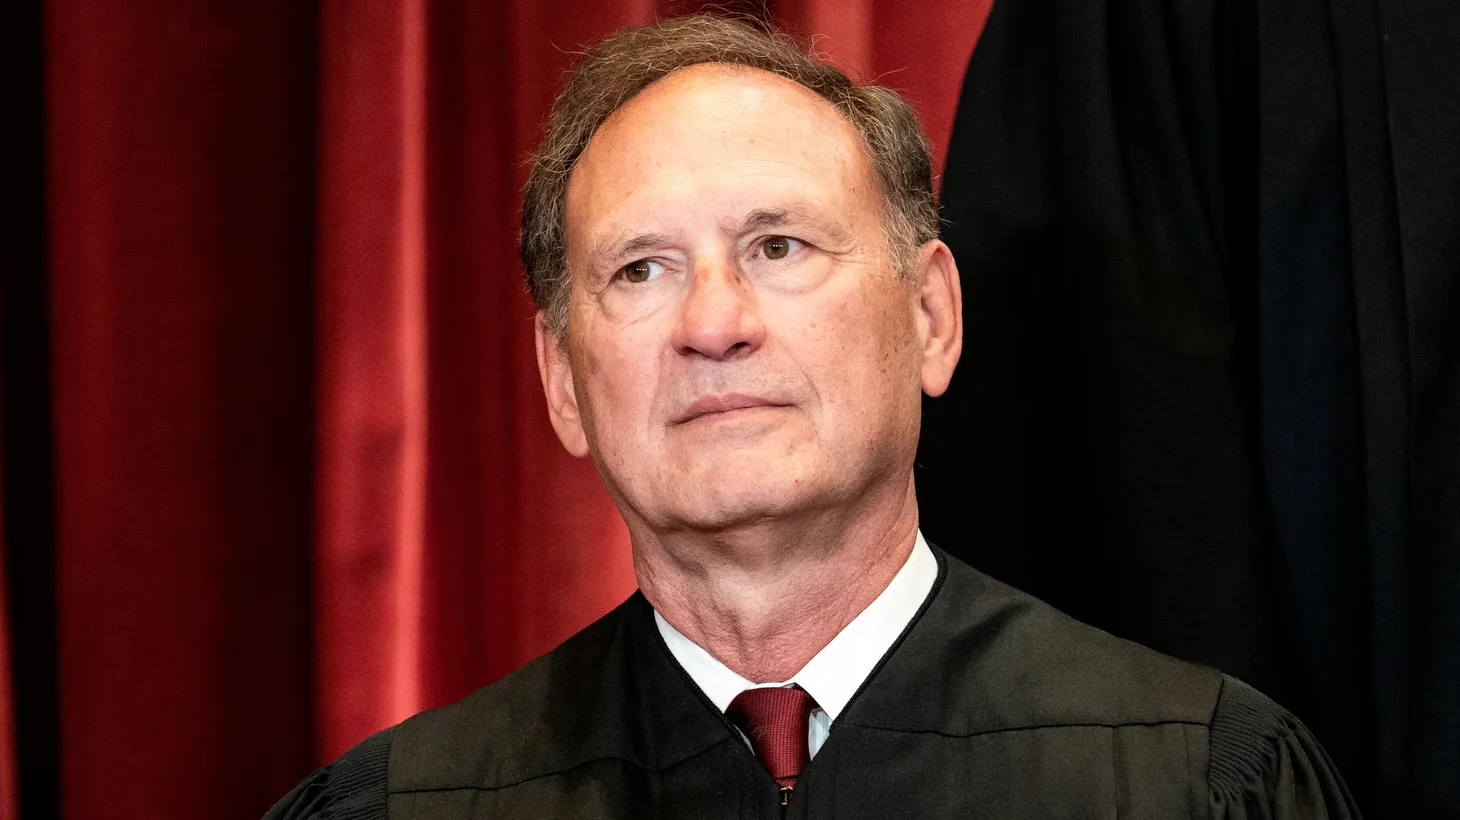 Associate Justice Samuel Alito poses during a group photo of the justices at the Supreme Court in Washington, U.S., April 23, 2021.